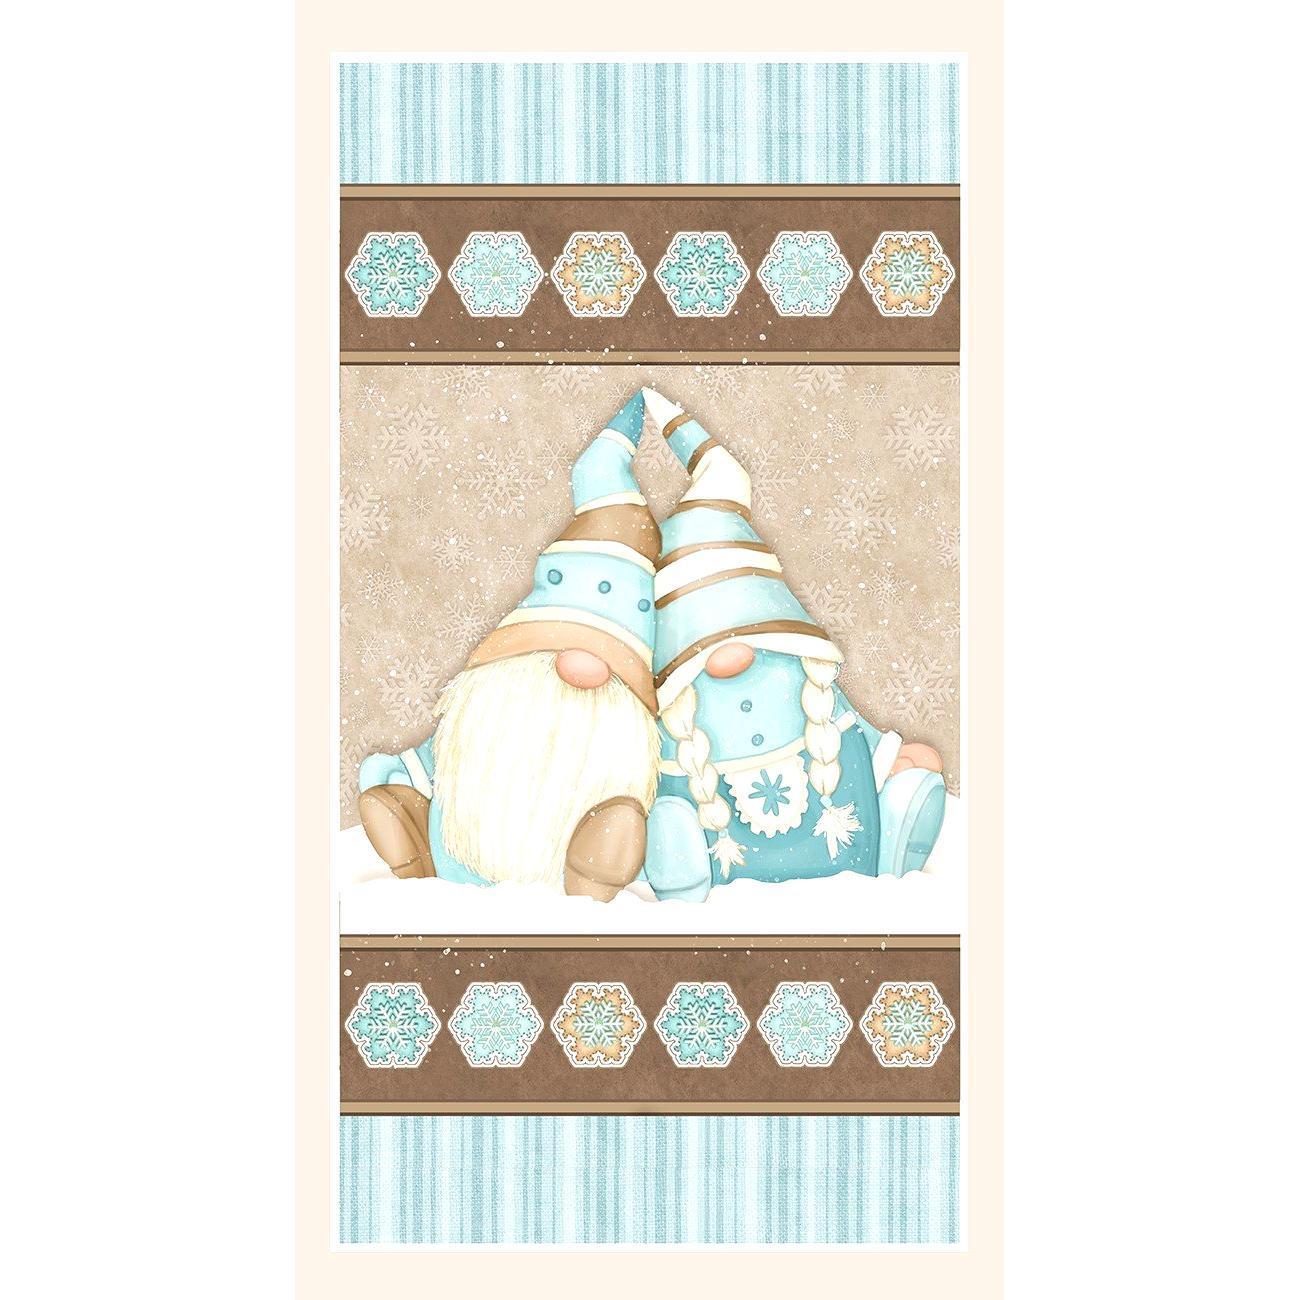 I Love Sn'Gnomies Multi Gnome Flannel Panel 24"x 44/45"-Henry Glass Fabrics-My Favorite Quilt Store